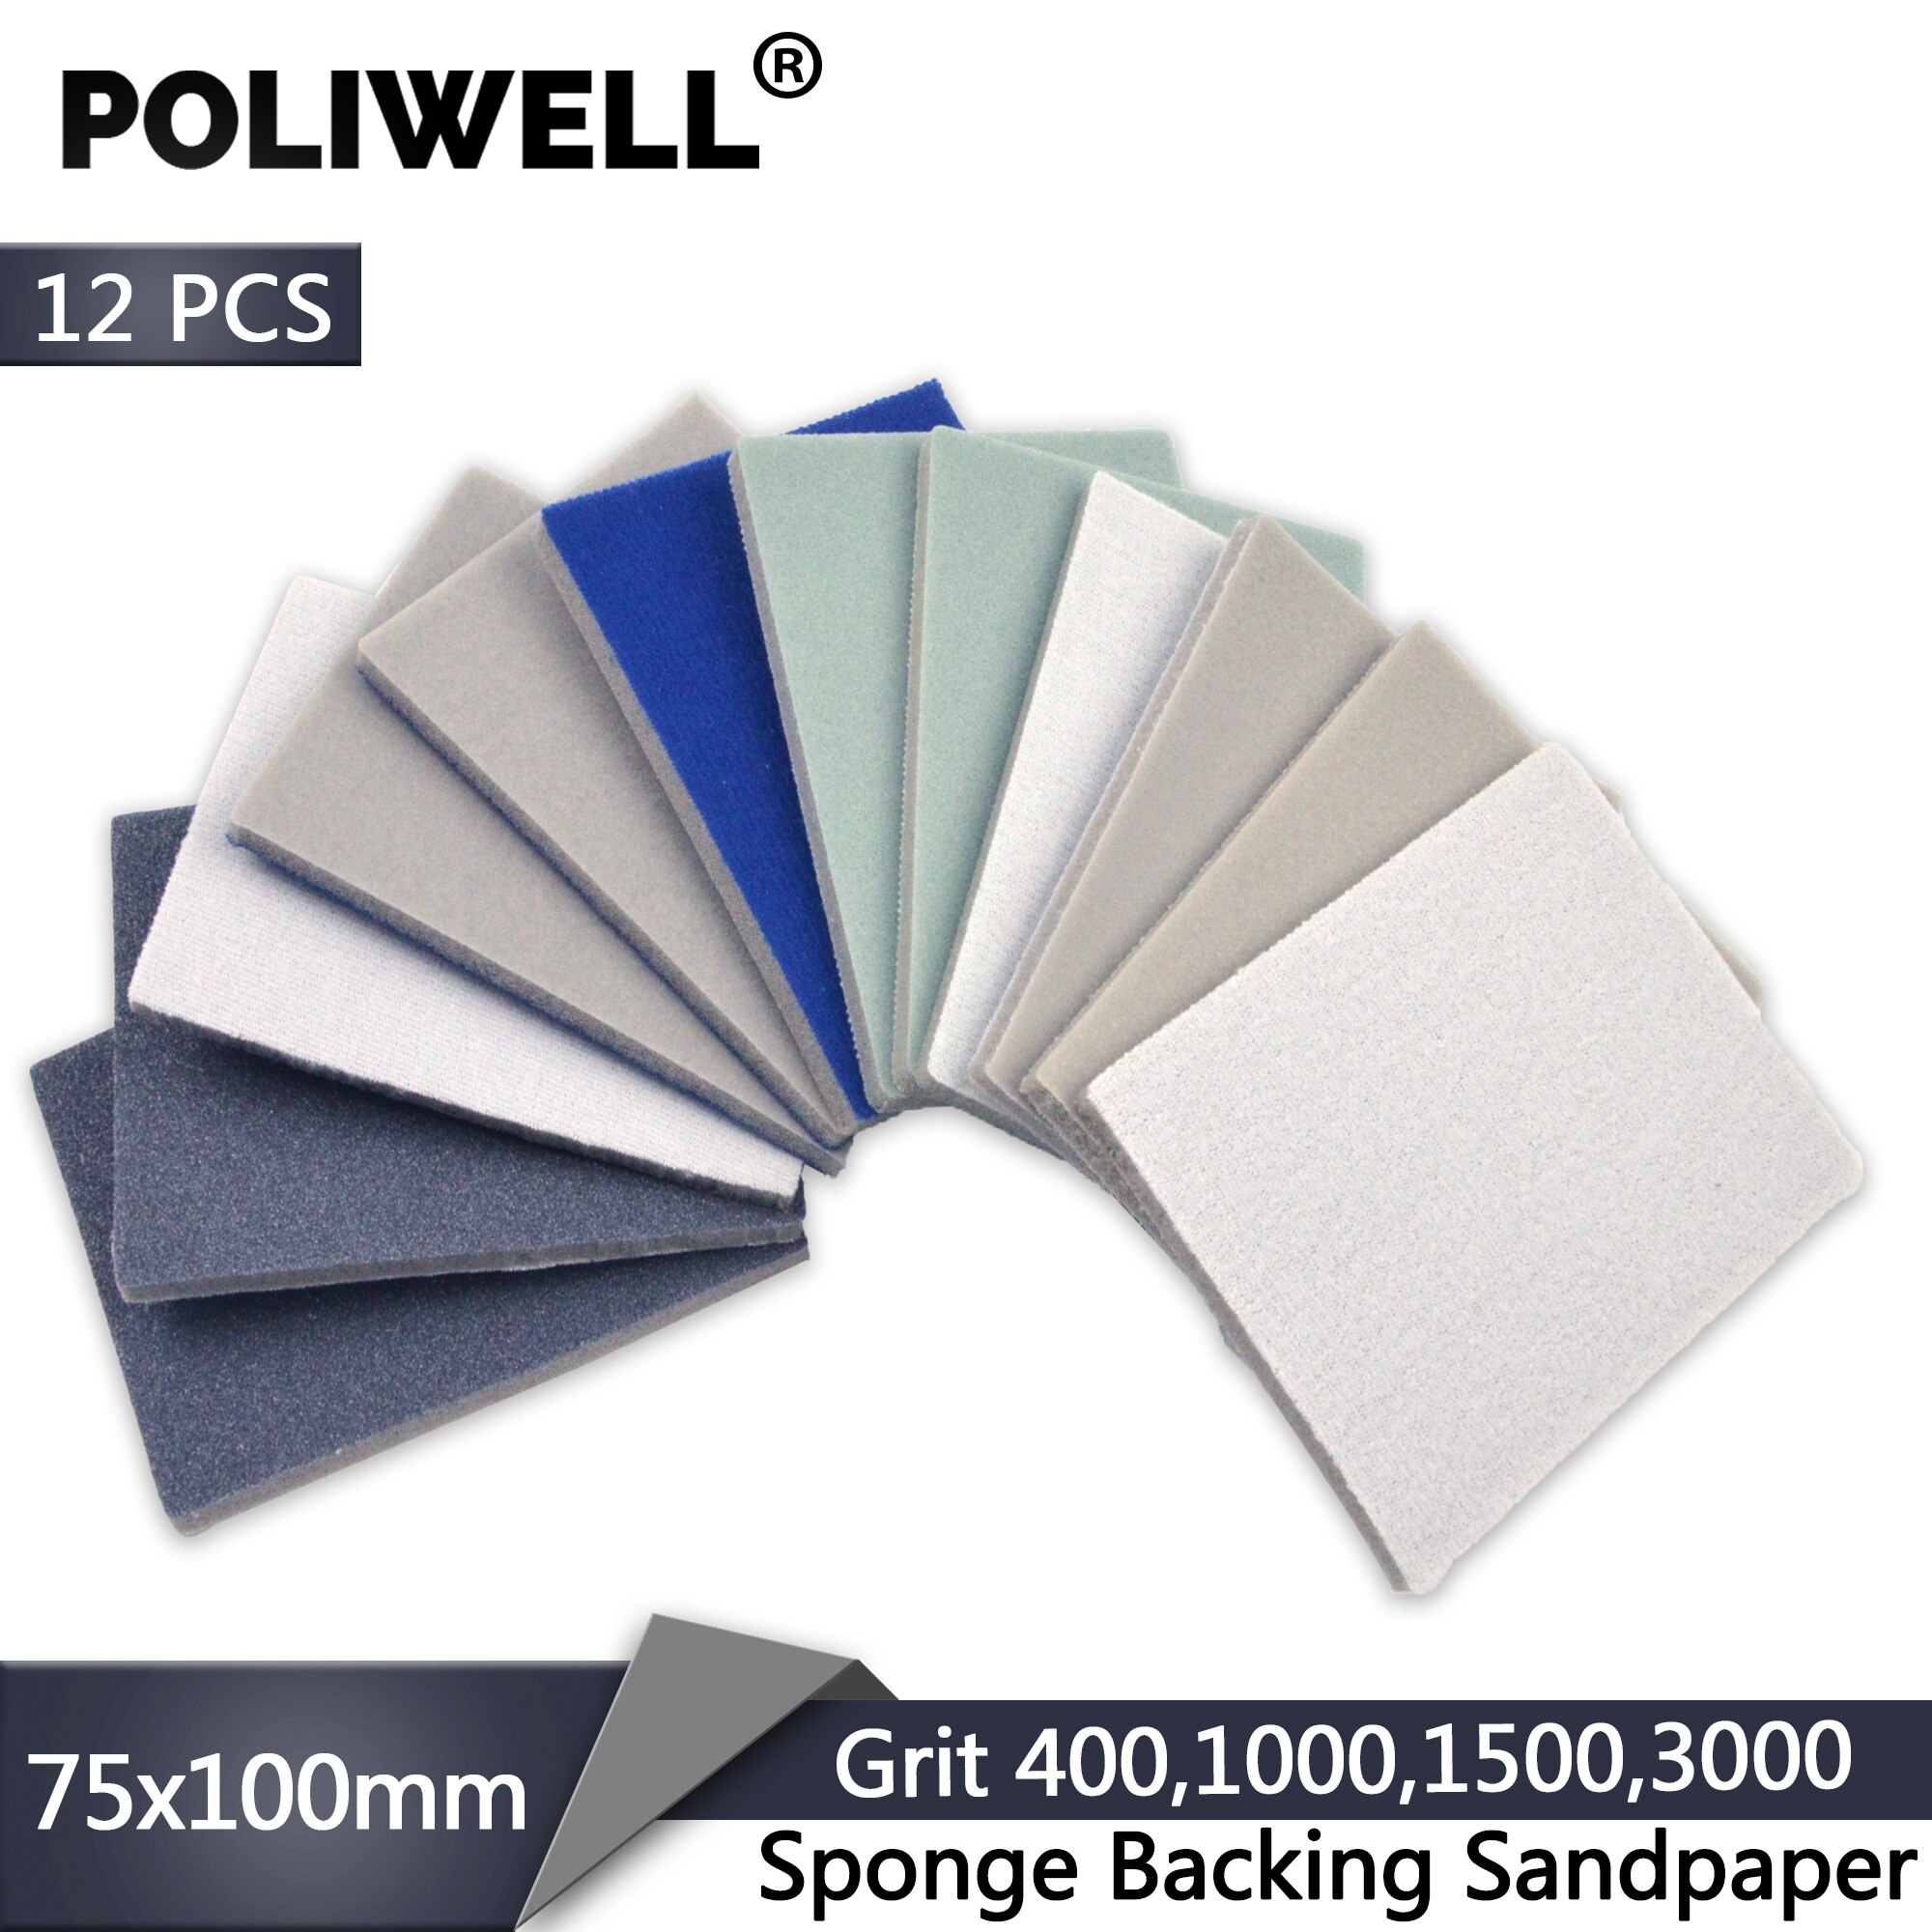 POLIWELL-   е 12 , 75x100mm,  4..